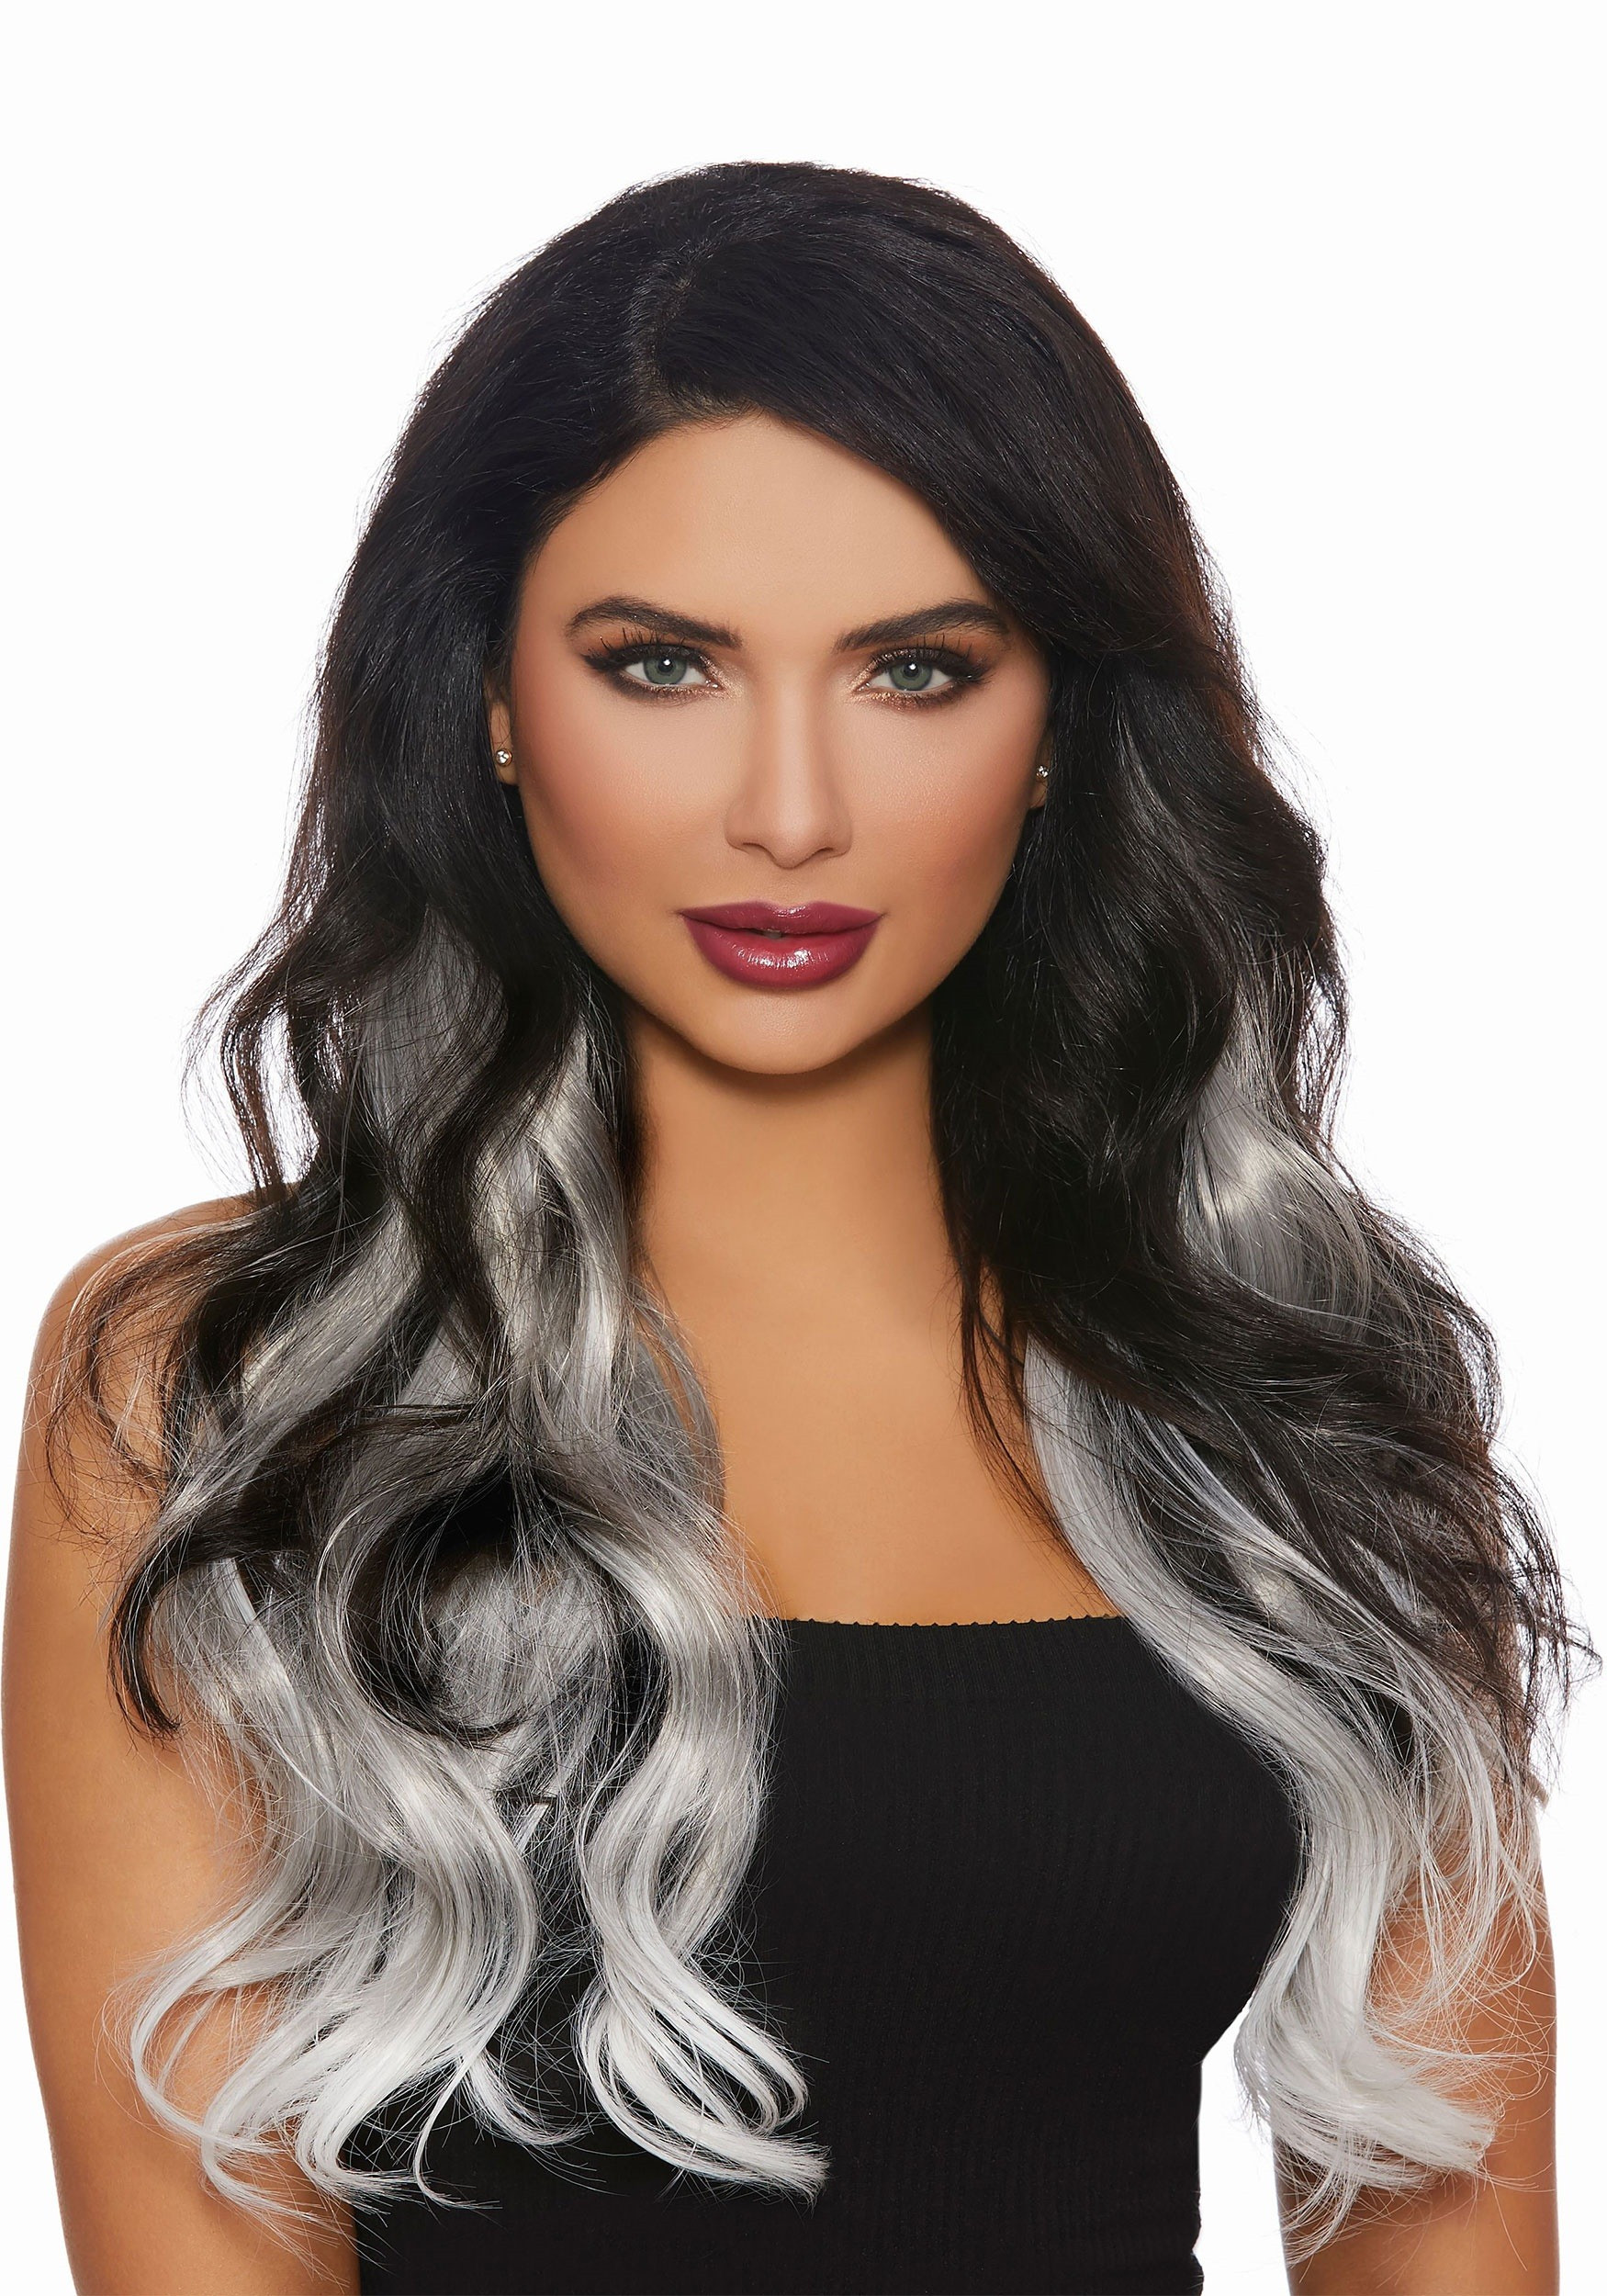 Long Ombre Hairstyles
 3 Piece Long Straight Ombre Grey White Hair Extensions